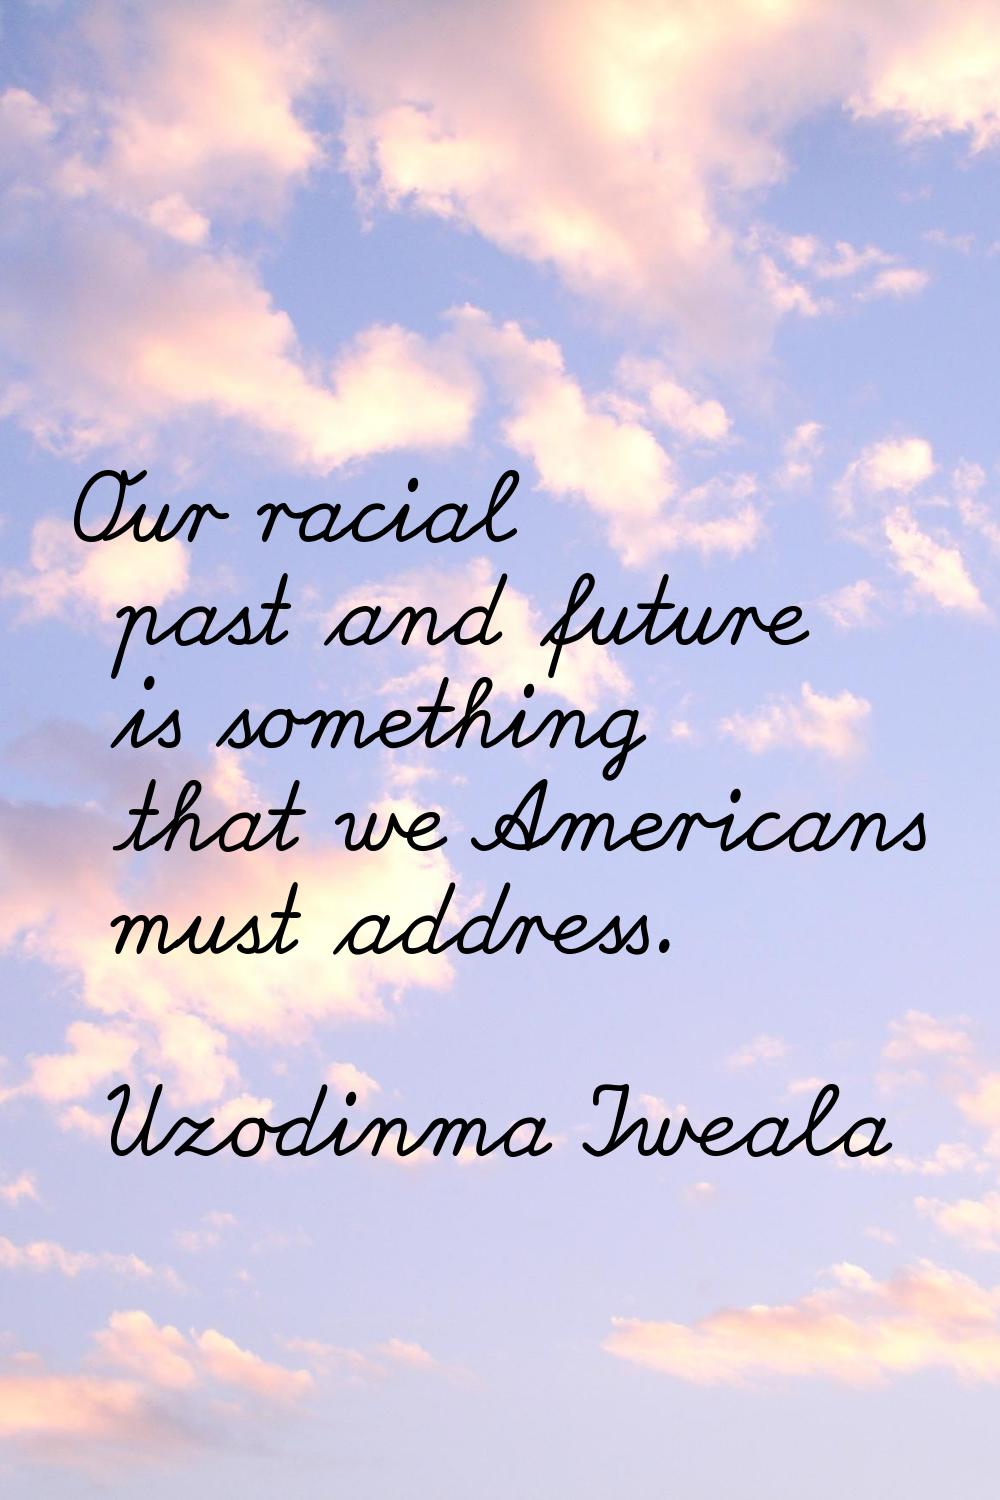 Our racial past and future is something that we Americans must address.